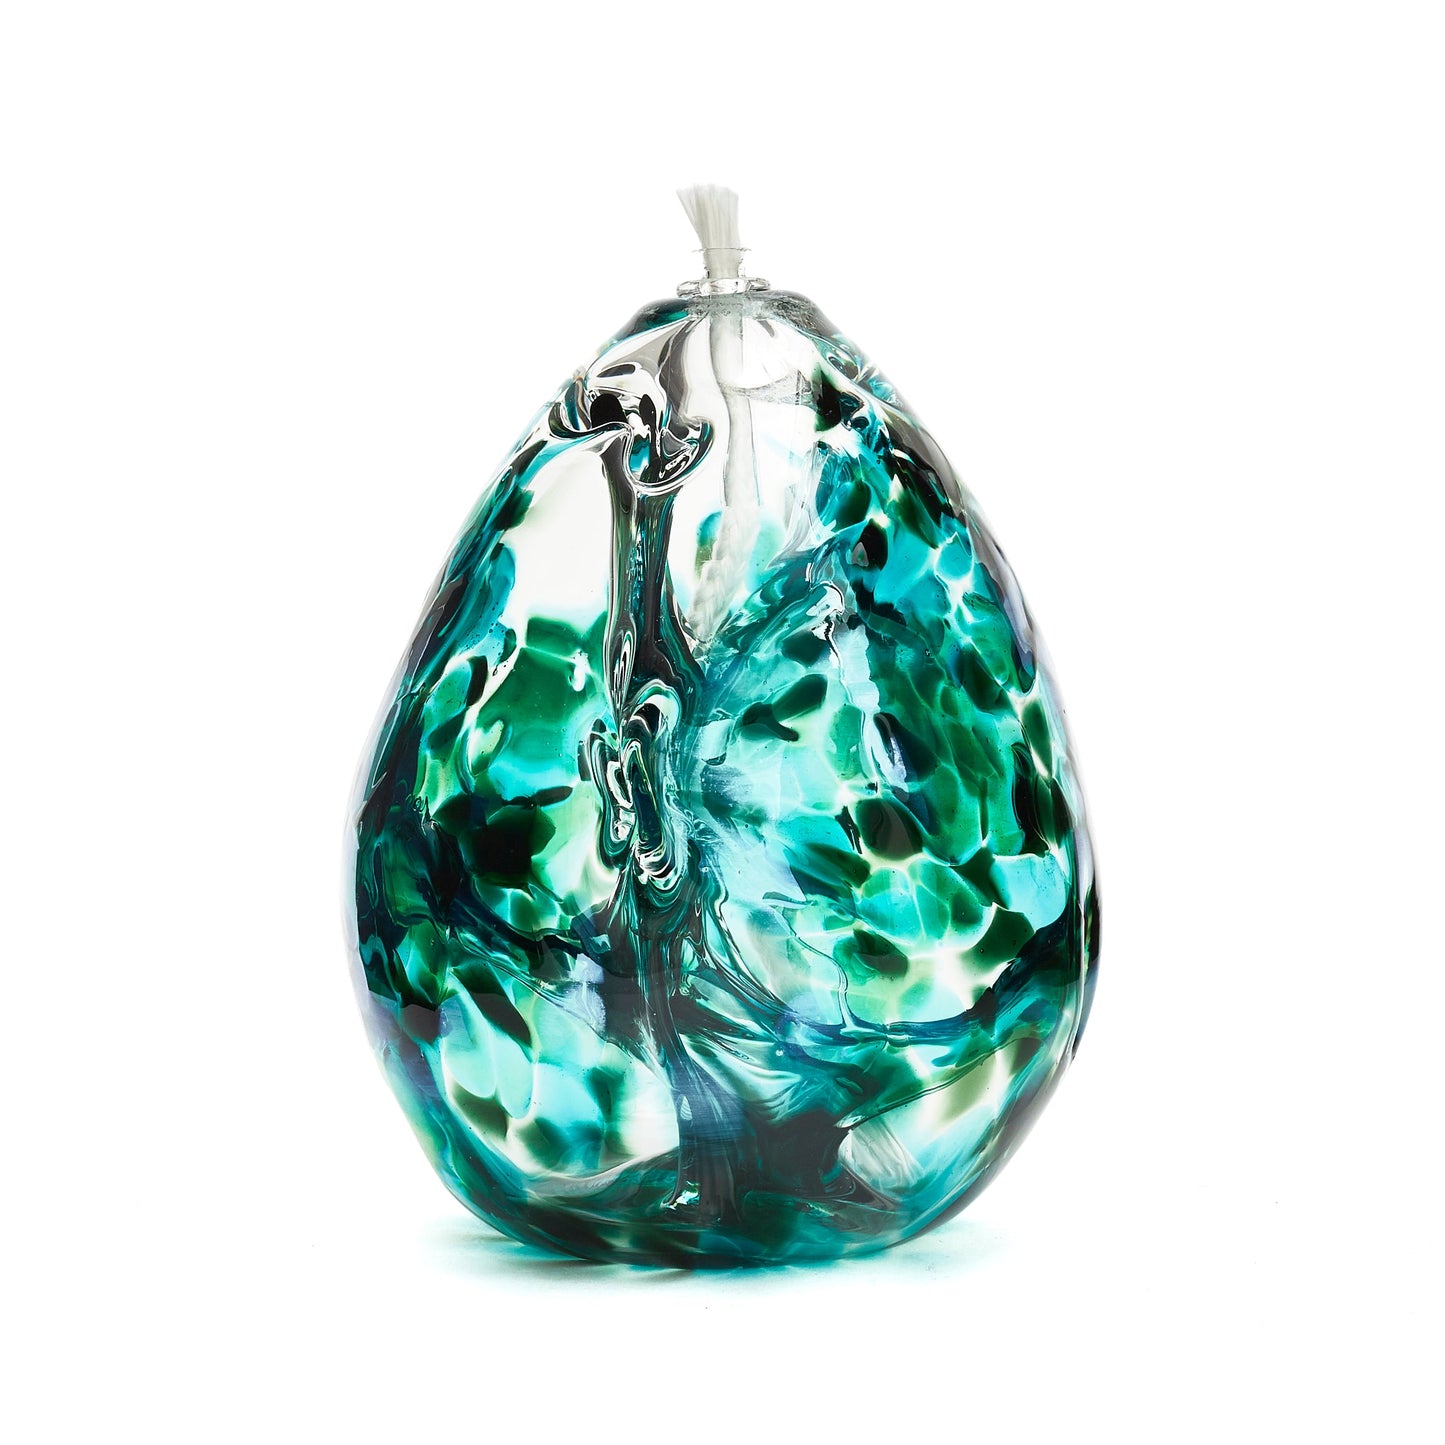 Handmade tall teardrop emerald glass oil lamp. Made in Ontario Canada by Gray Art Glass.